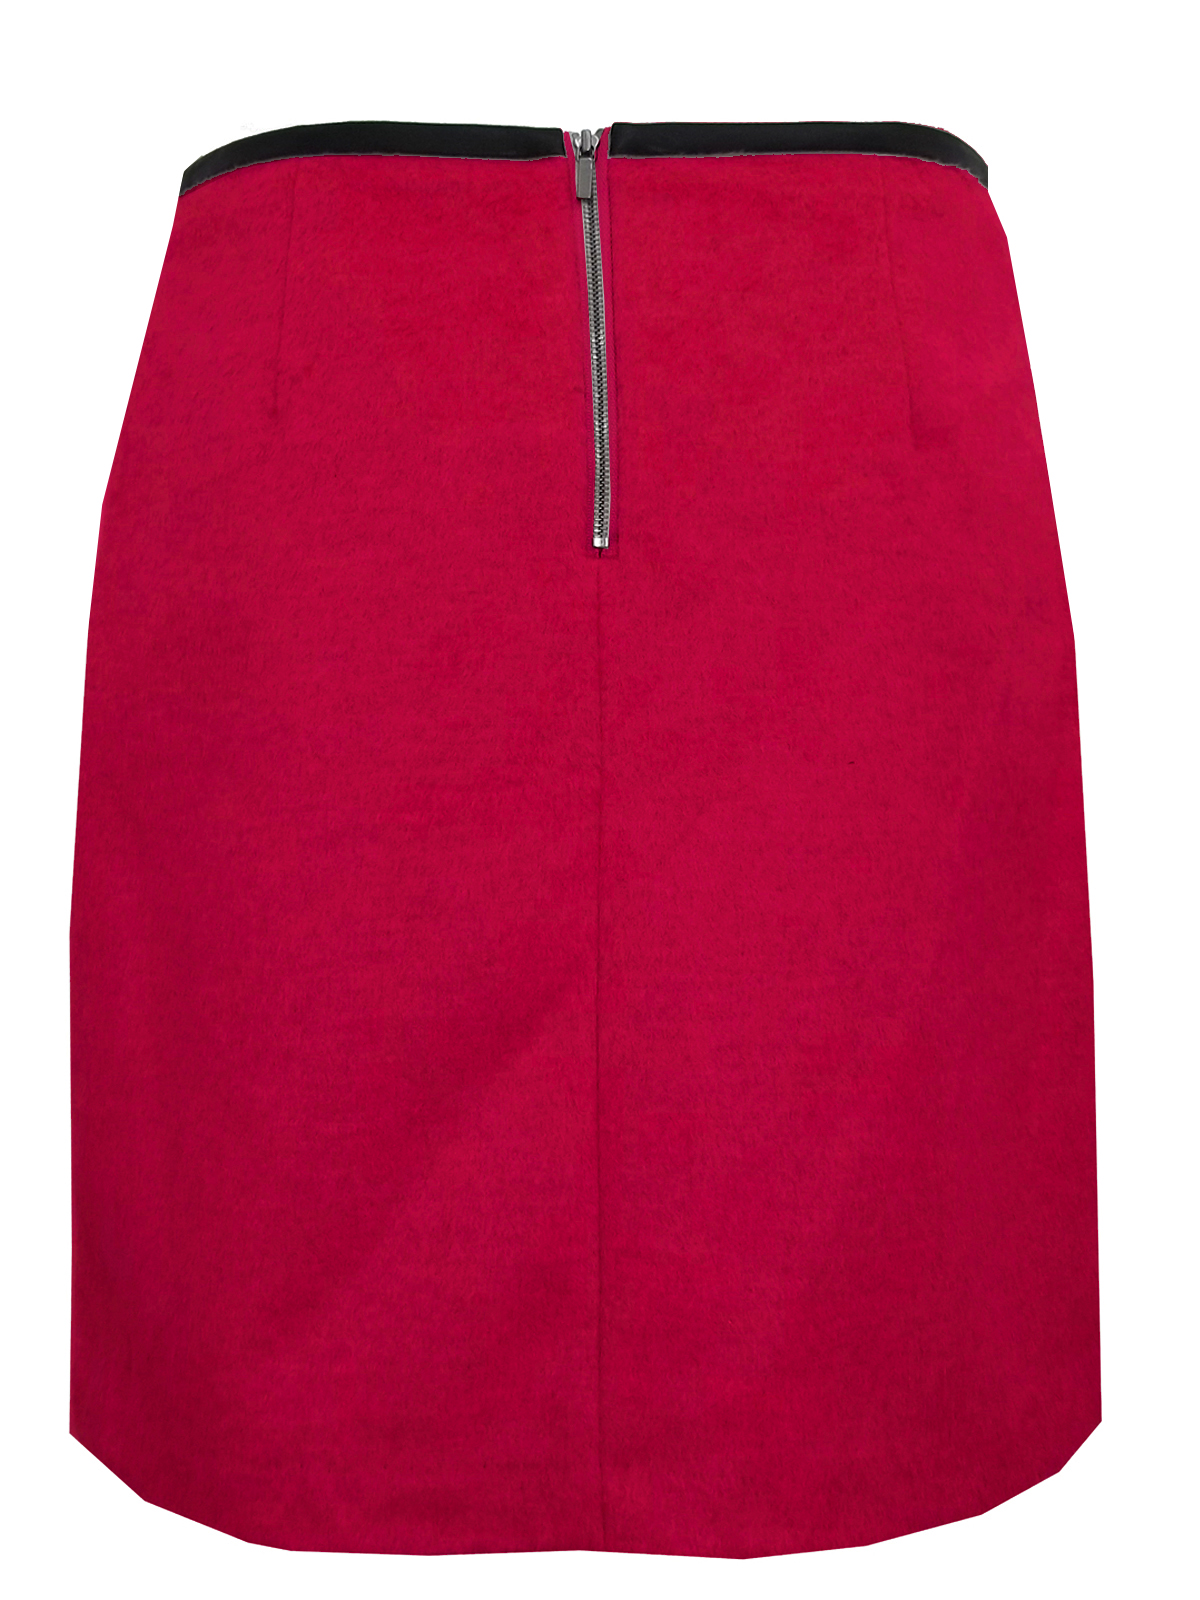 Marks and Spencer - - M&5 RED Faux Leather Trim Mini Skirt w/Wool ...